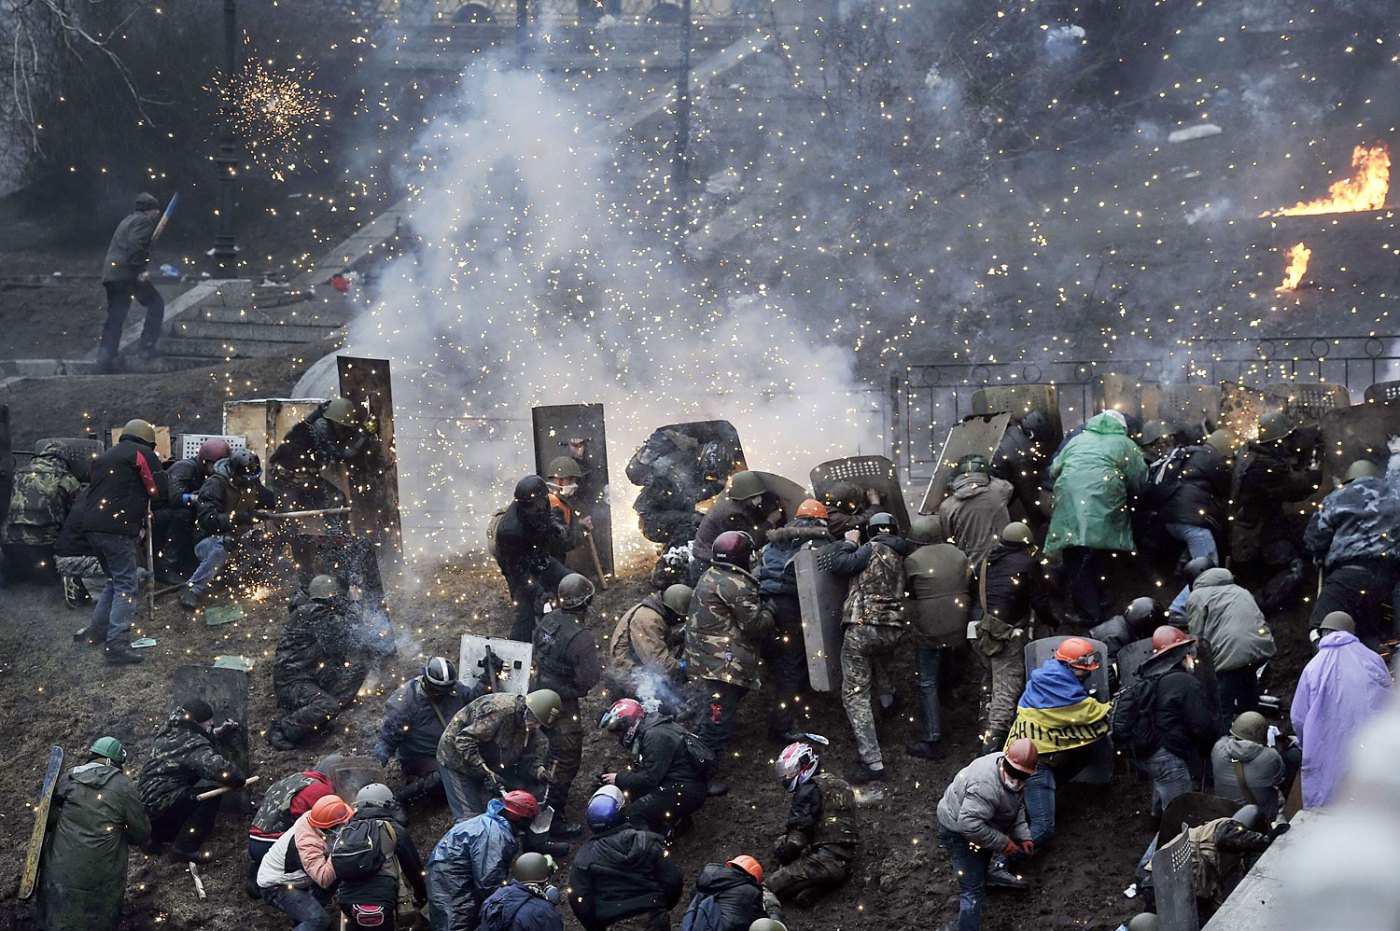 Protesters clash with police after gaining new positions near the Independence square in Kiev, Ukraine on February 20, 2014. (Louisa Gouliamaki—AFP/Getty Images)